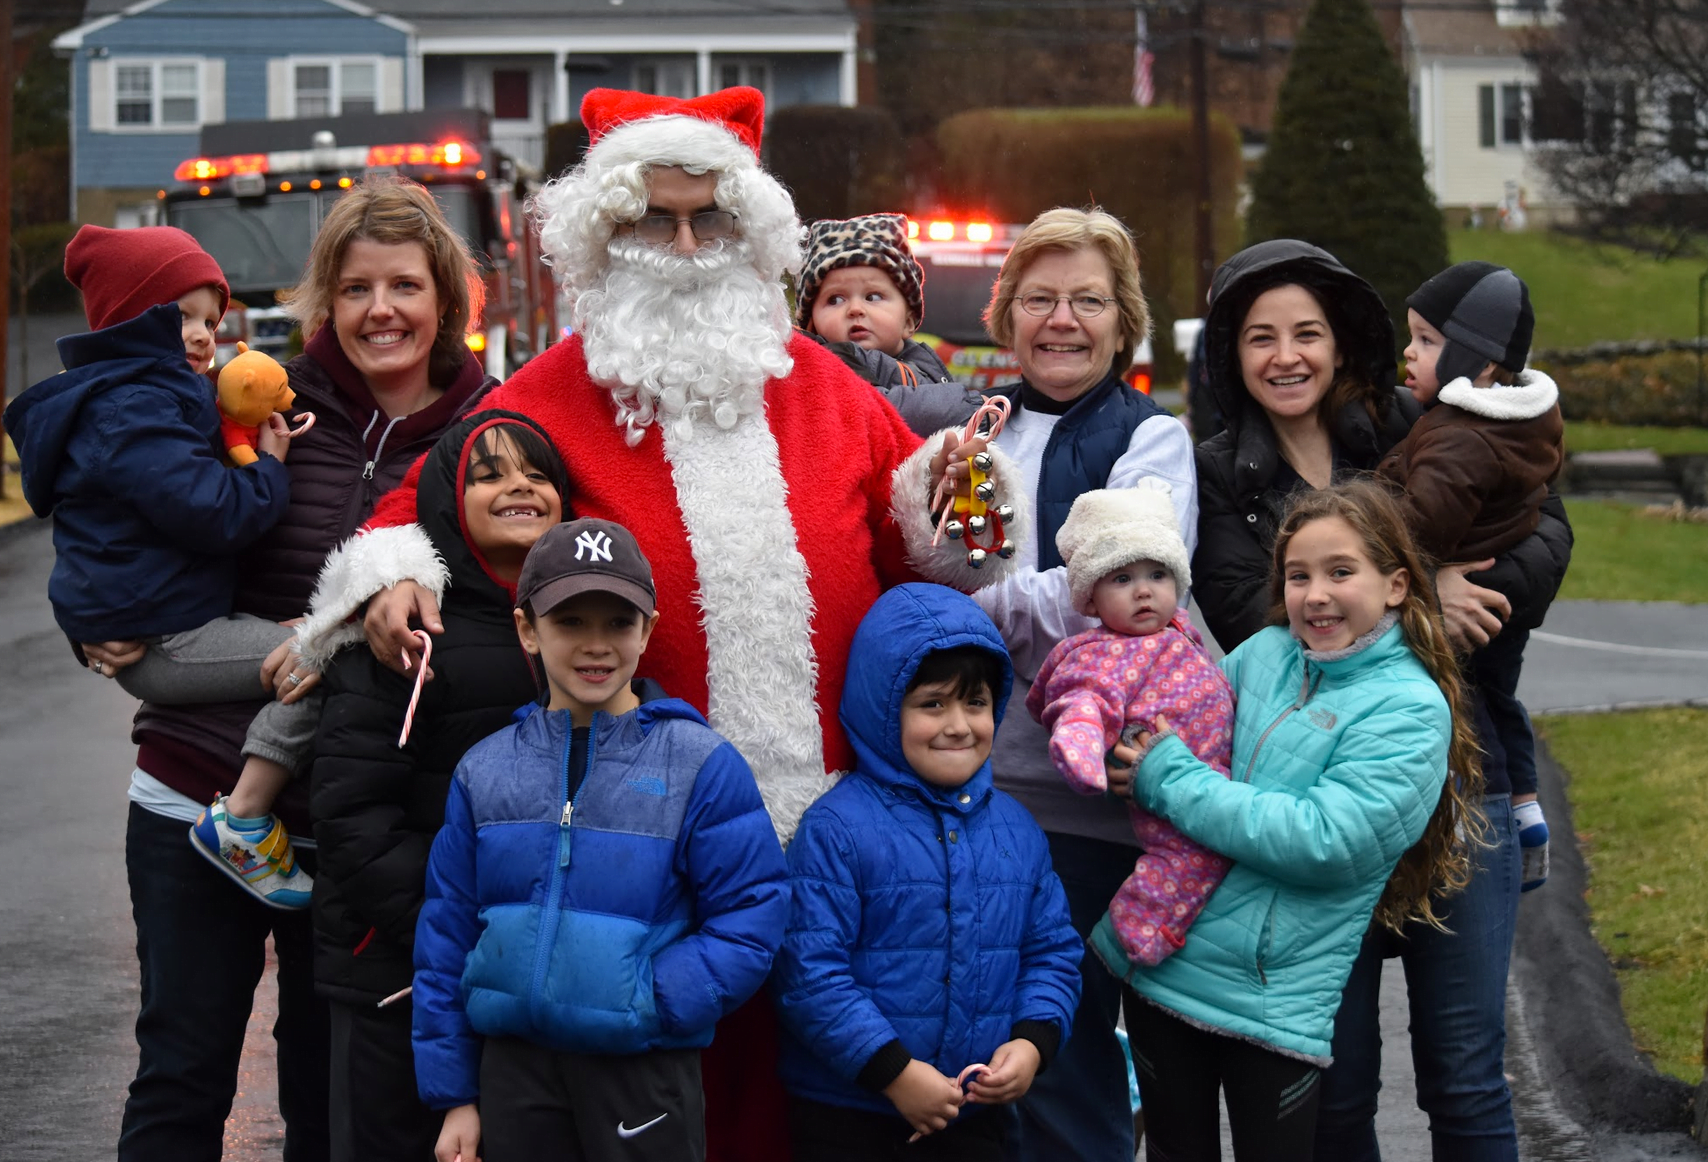 Glenville Volunteer Fire Dept visited families in the community in full uniform along with Santa, music and candy canes. Dec 16, 2018 Photo: Heather Brown Lowthert